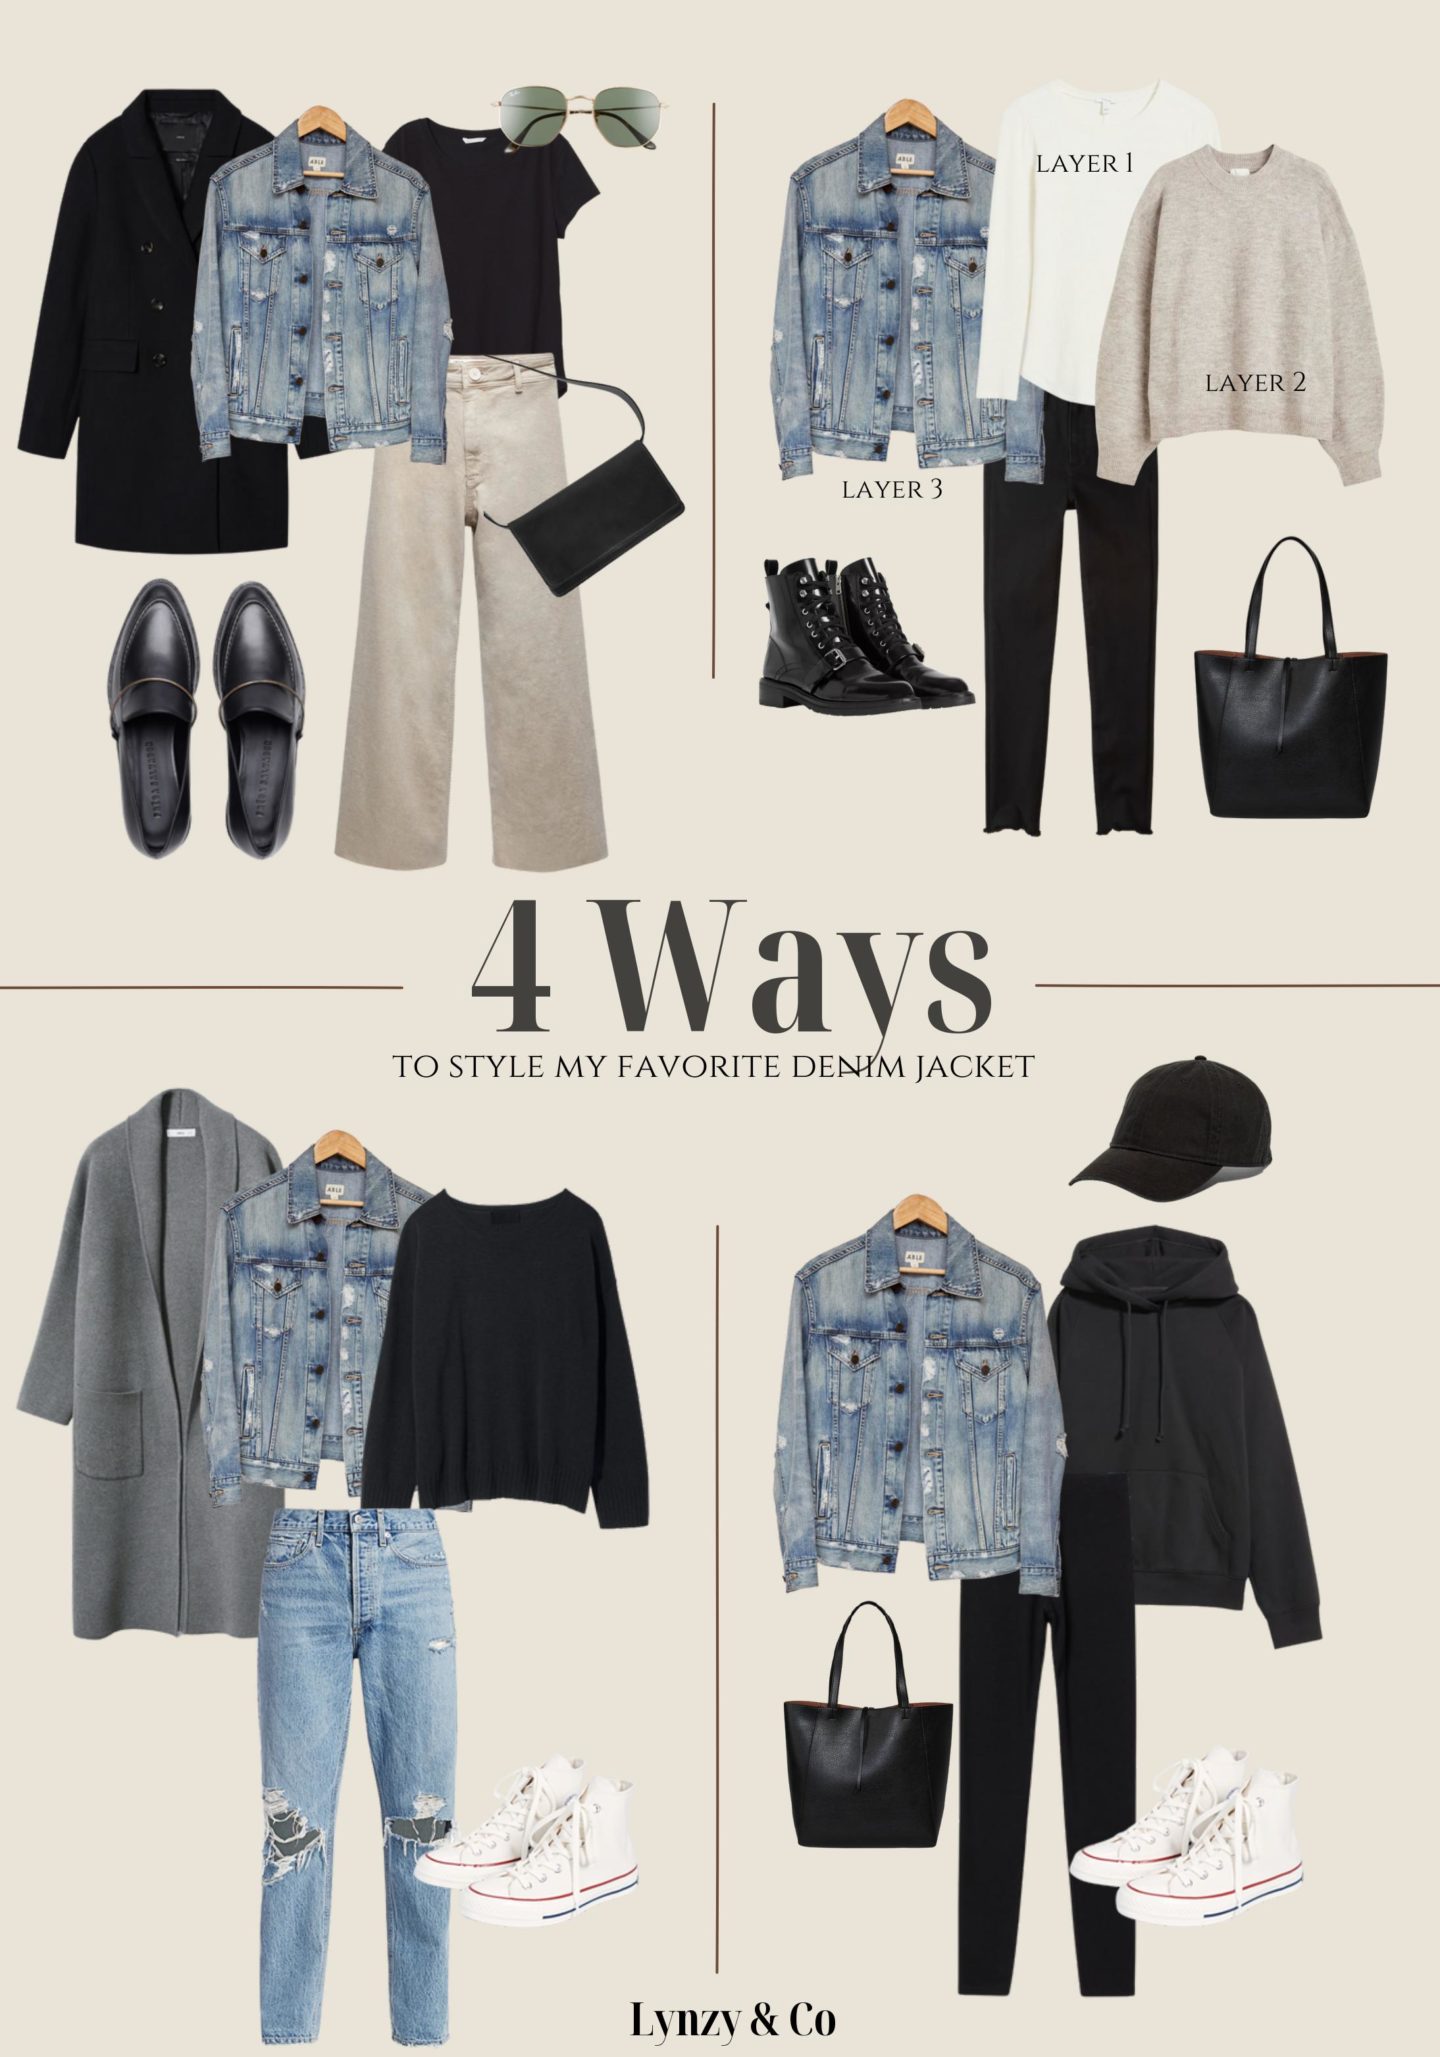 4 Ways to Style a Denim Jacket with Pants